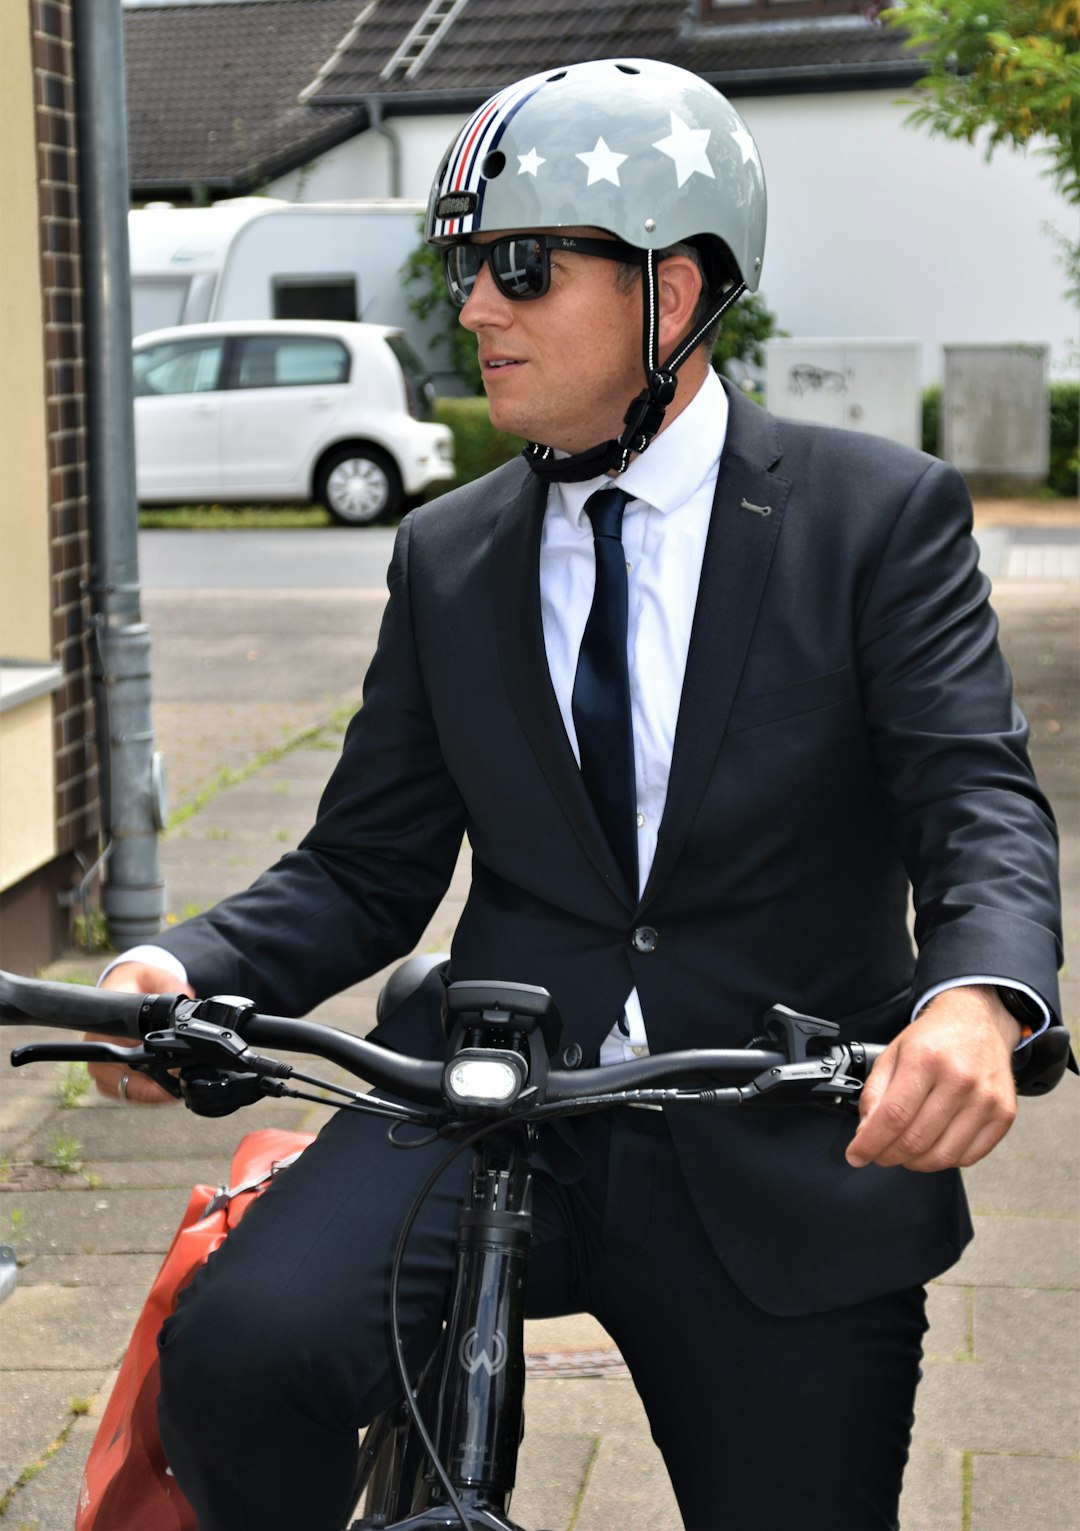 man in black suit riding on motorcycle